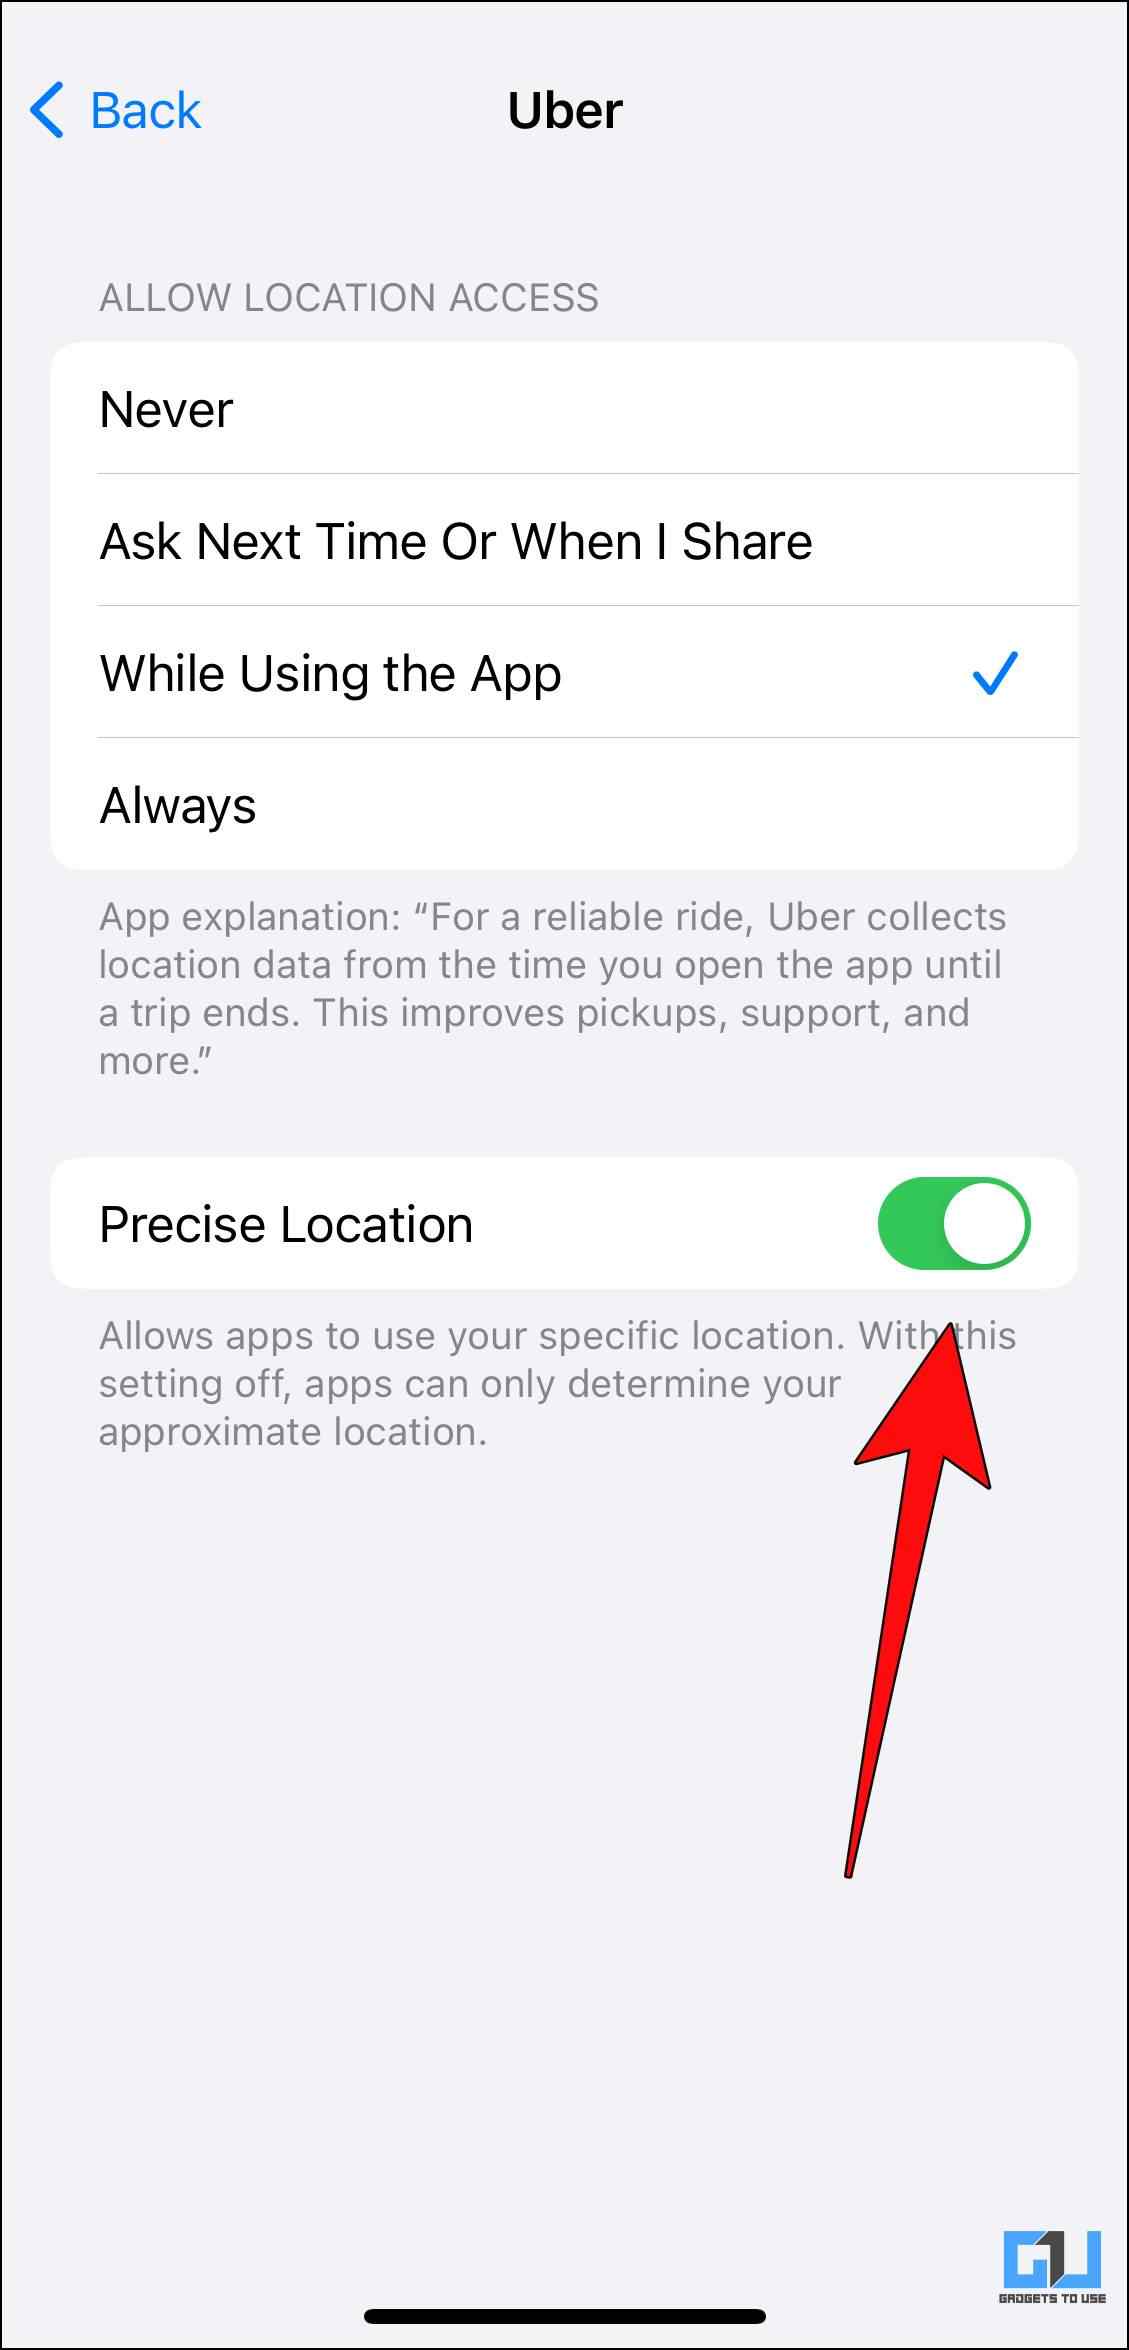 Turn on the toggle for Precise Location